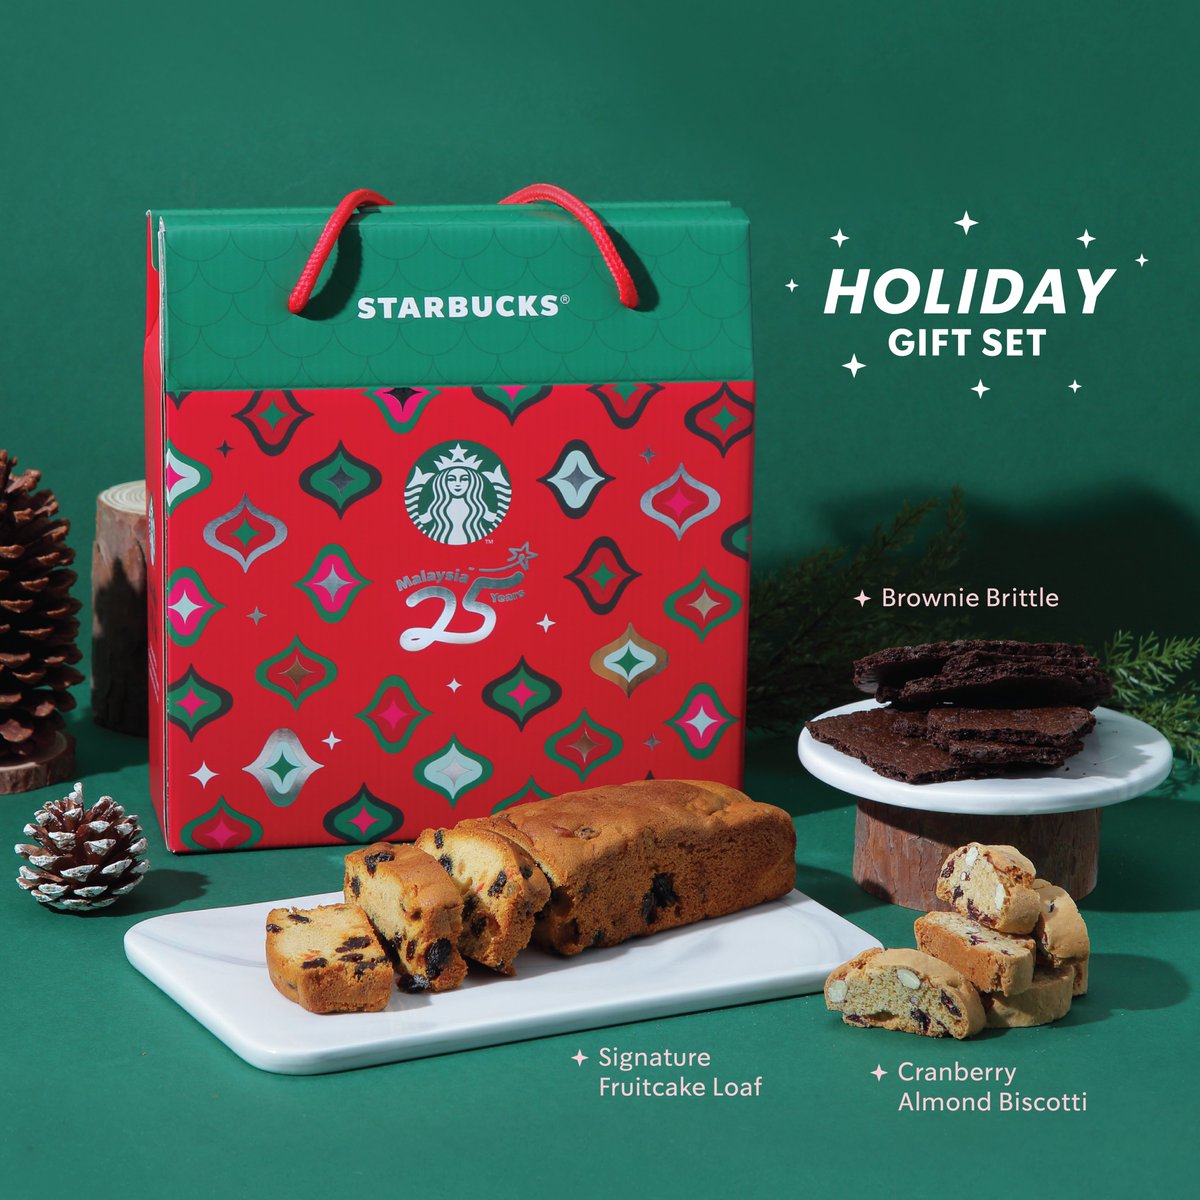 Savor the season with our Holiday Gift Set! 🎁✨ Indulge in the delightful trio of Brownie Brittle, Cranberry Almond Biscotti and our Signature Fruitcake Loaf. Unravel and share the seasons with one delicious bite at a time! 👨‍👩‍👧‍👦 #StarbucksMalaysia #ReimagineYourHoliday